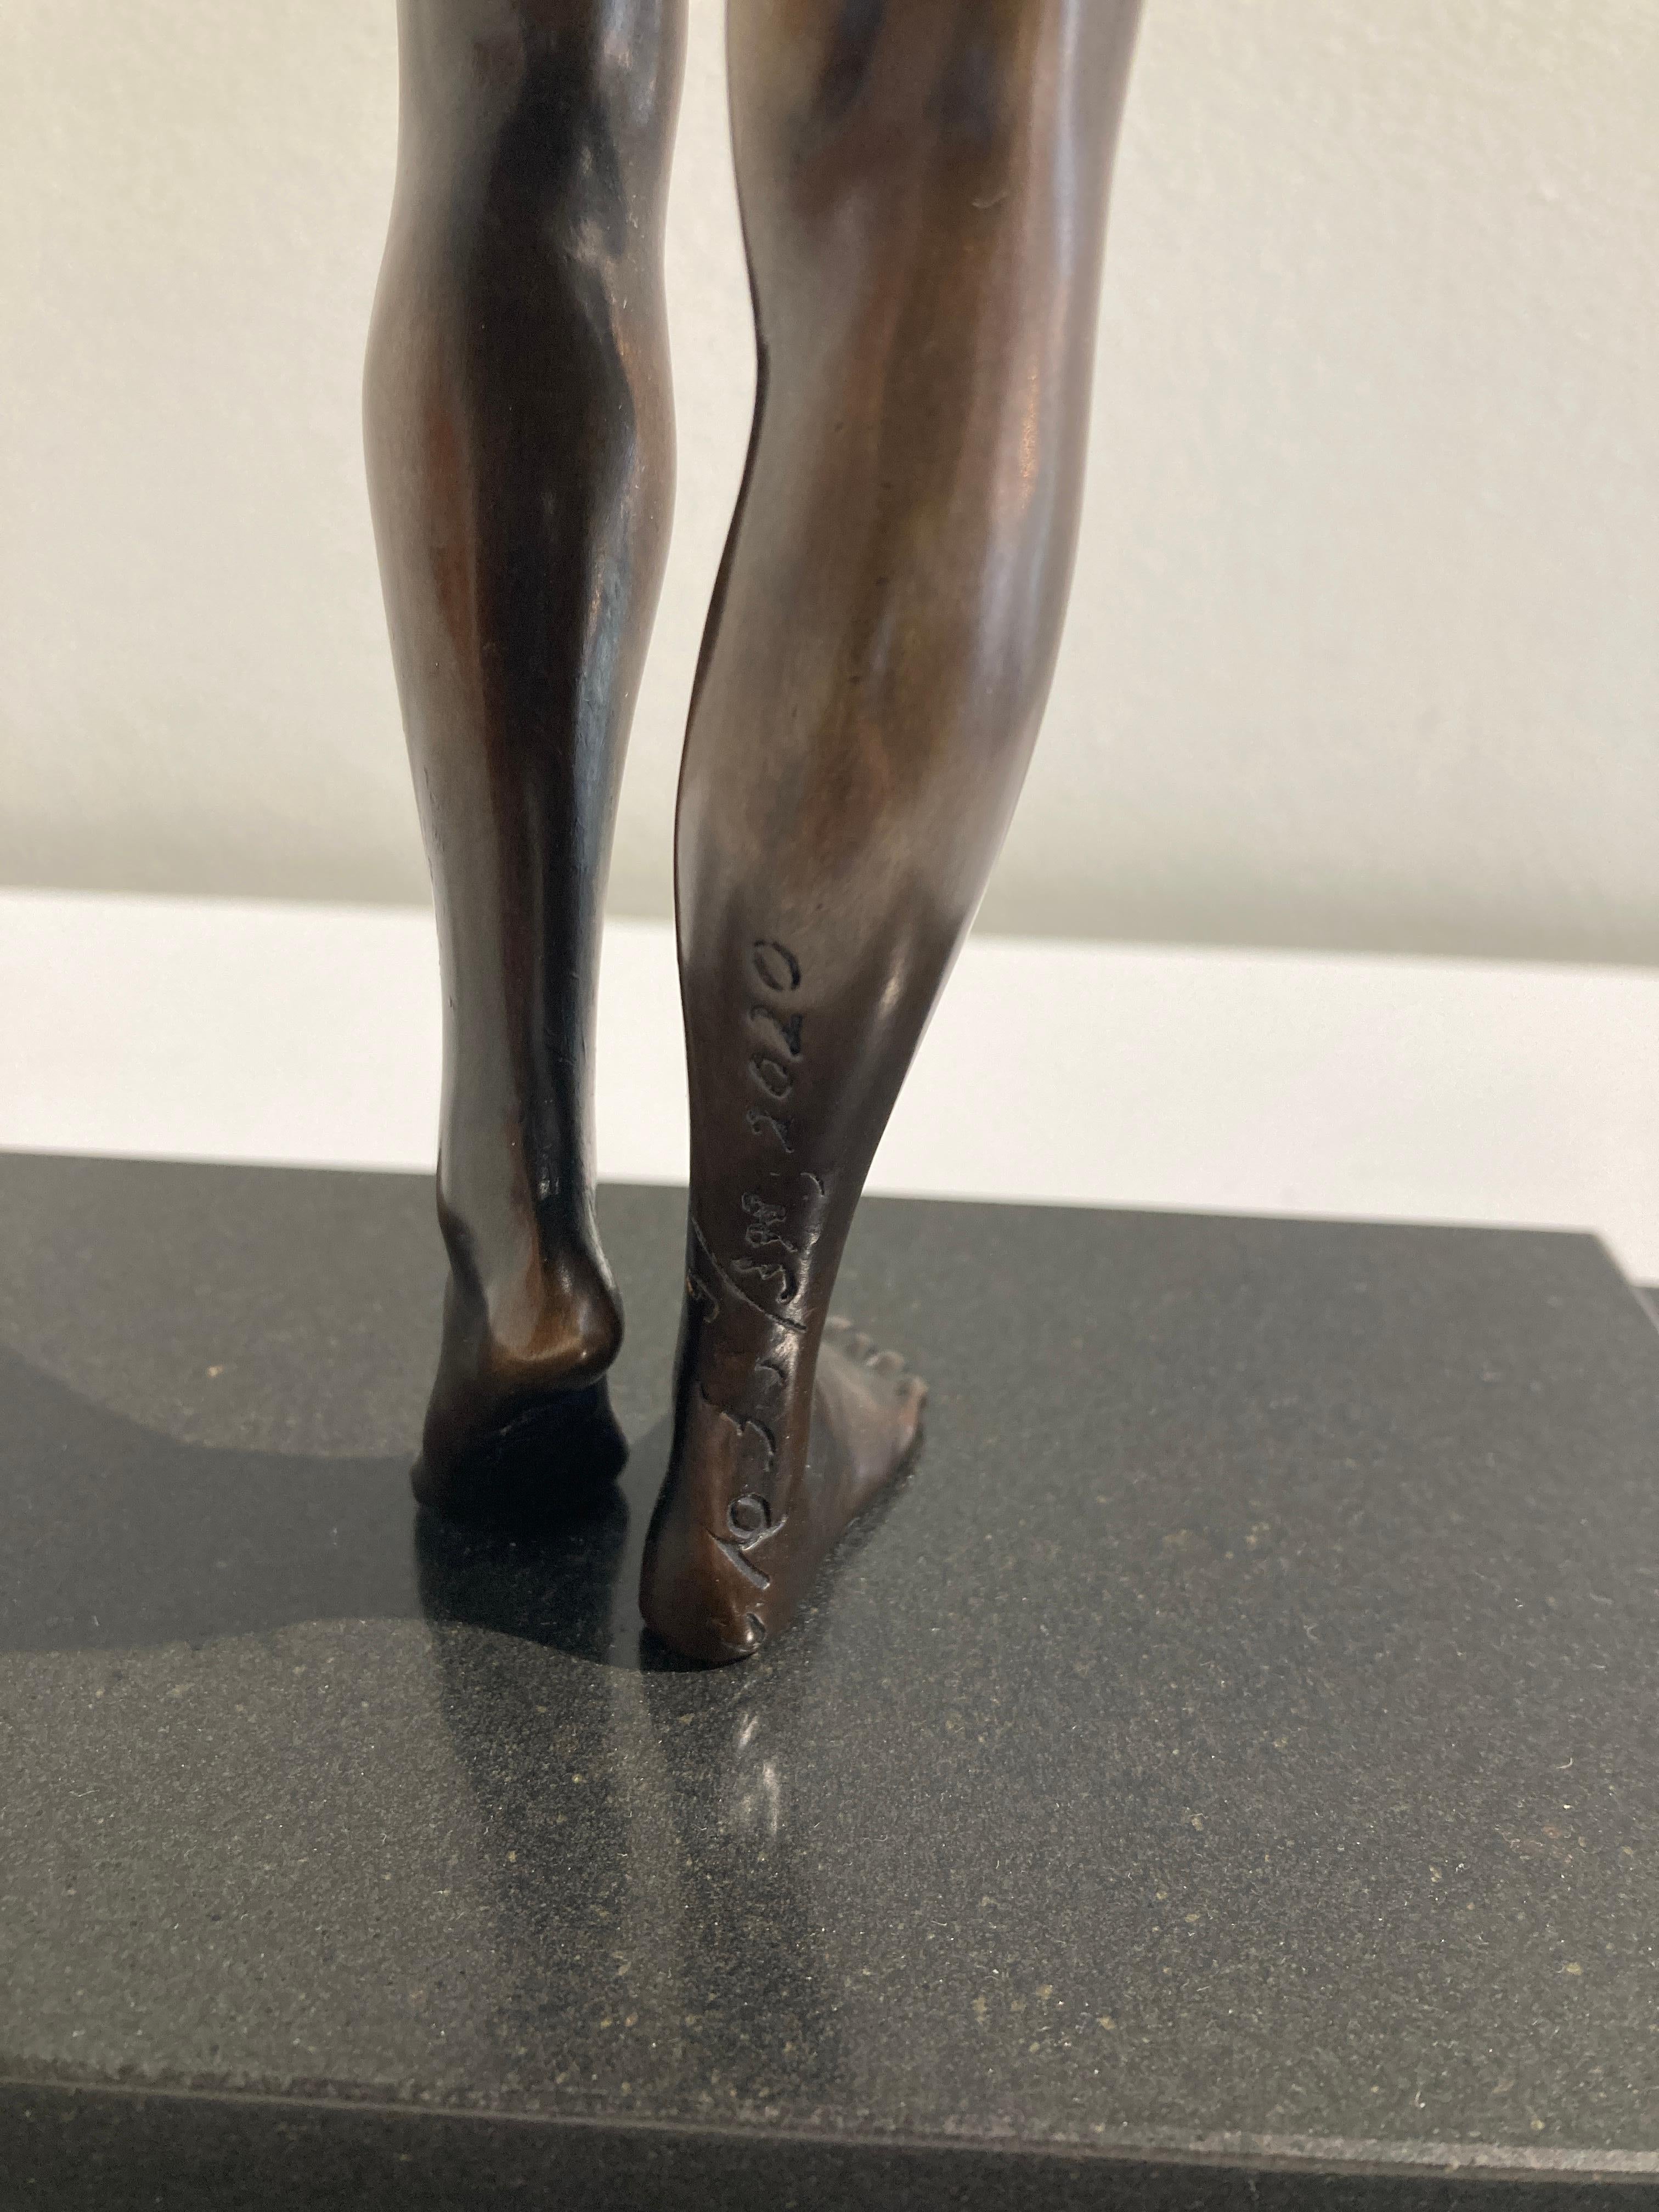 Painted bronze with stone base. 
Limited and signed edition number 9 of 398. 

Carole A. Feuerman (born 1945) is an American sculptor and author working in Hyperrealism. She is one of the three major artists credited with starting the movement in